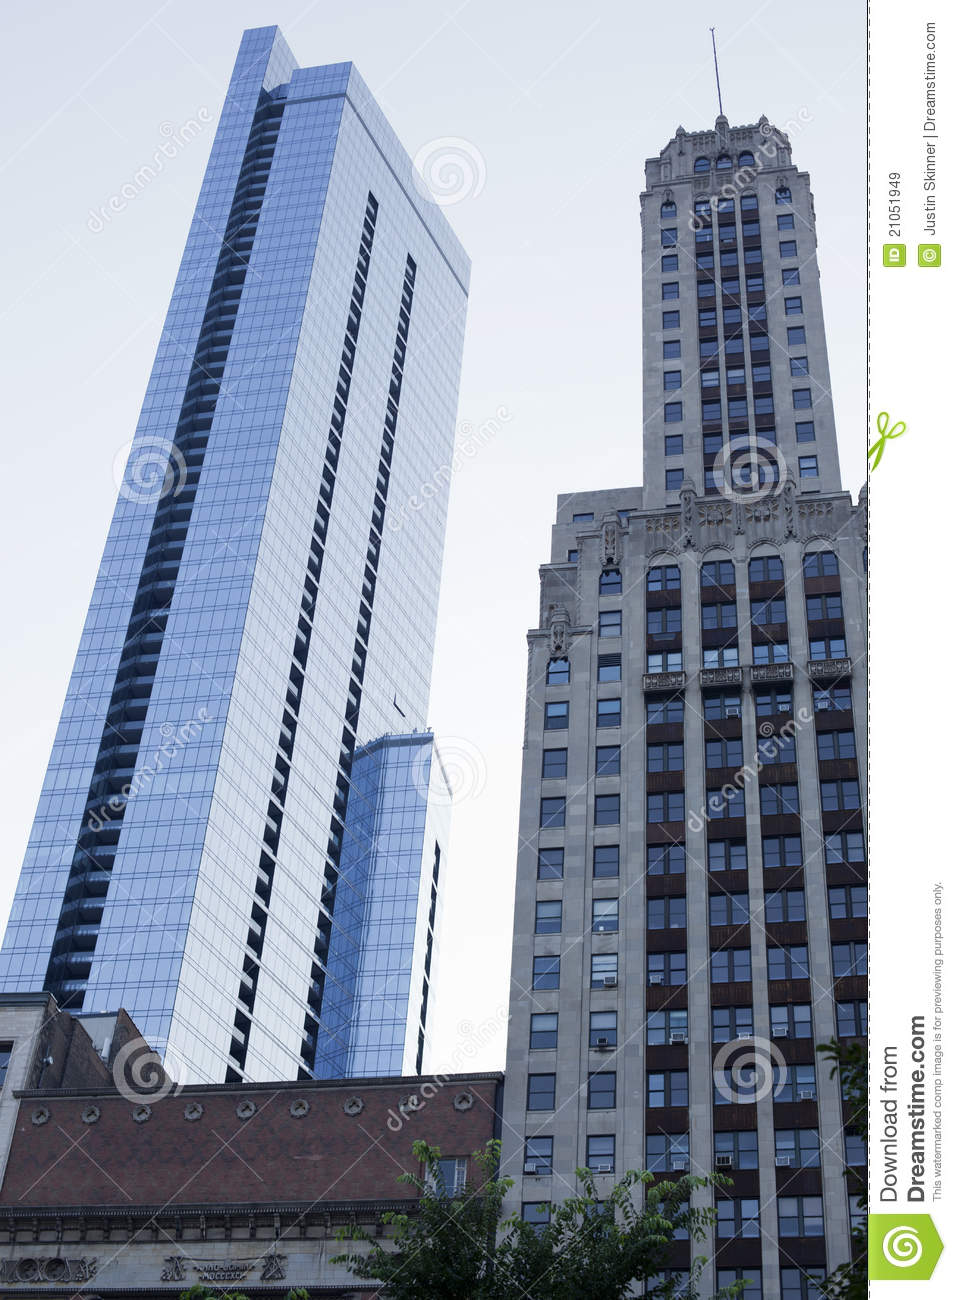 Tall Chicago Buildings Royalty Free Stock Images   Image  21051949